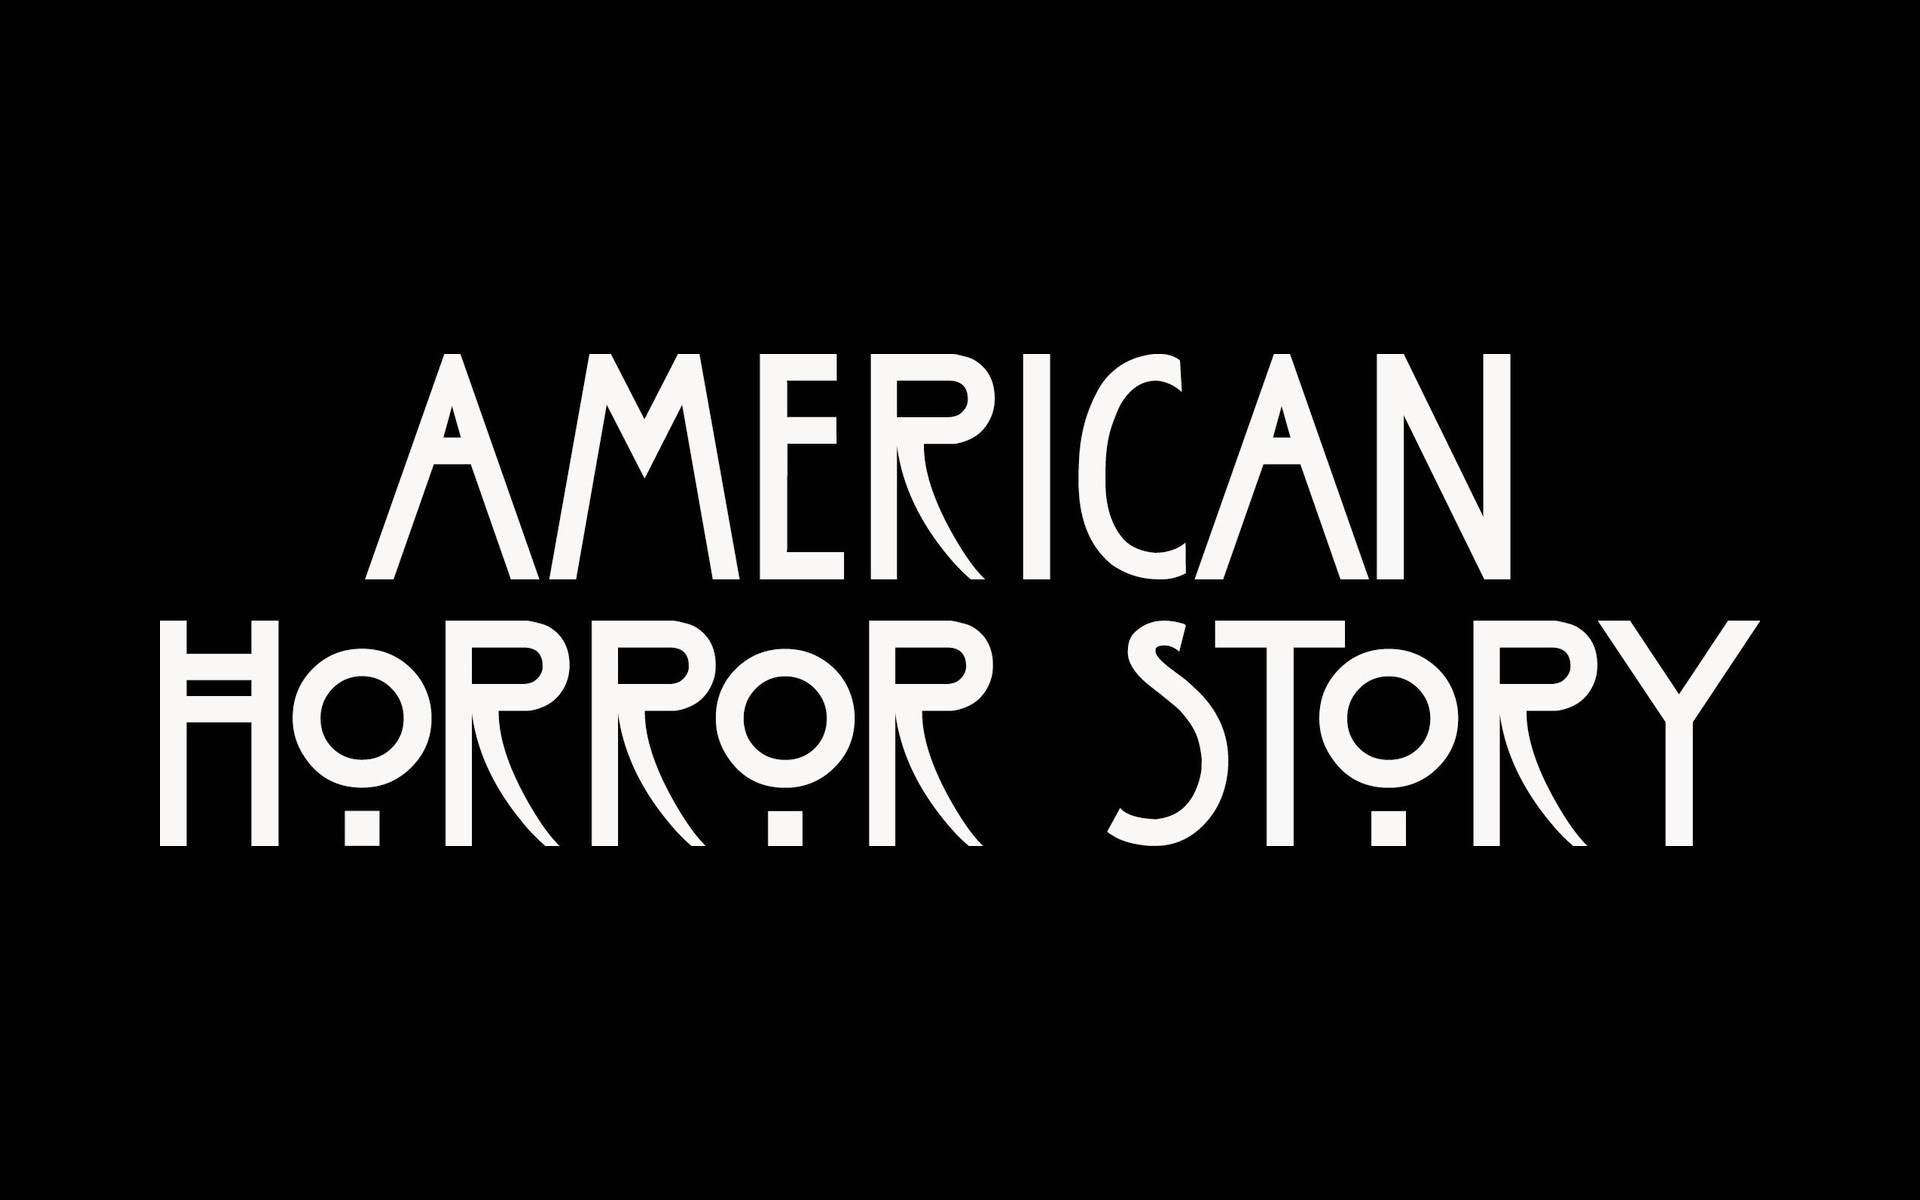 AMERICAN HORROR STORY COVERS & WALLPAPERS